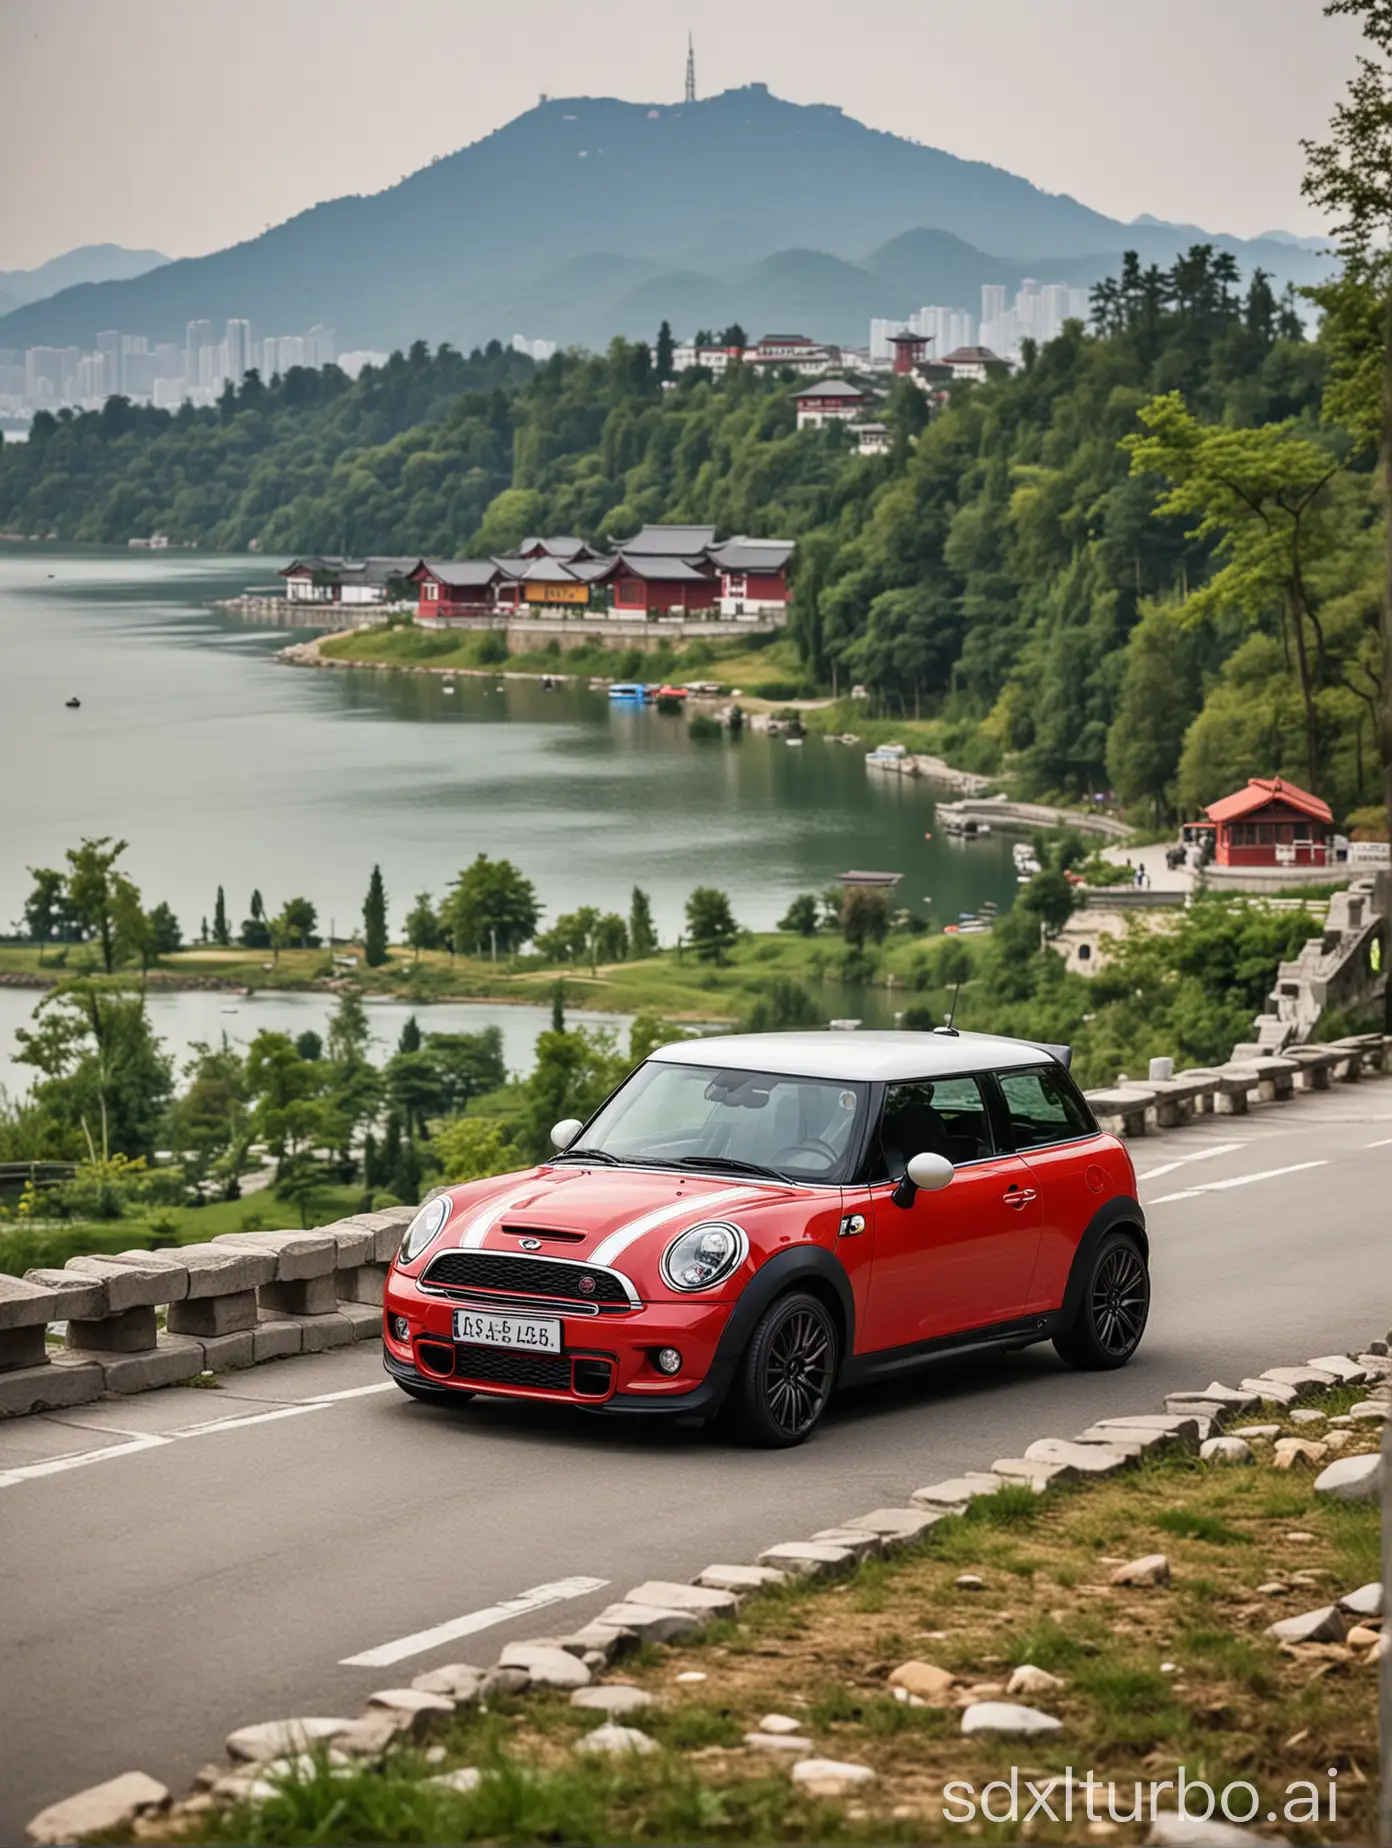 mini cooper s r56, cartoon image, red body, white roof, white wheels, 45-degree angle to the left front, with Hangzhou West Lake in the background